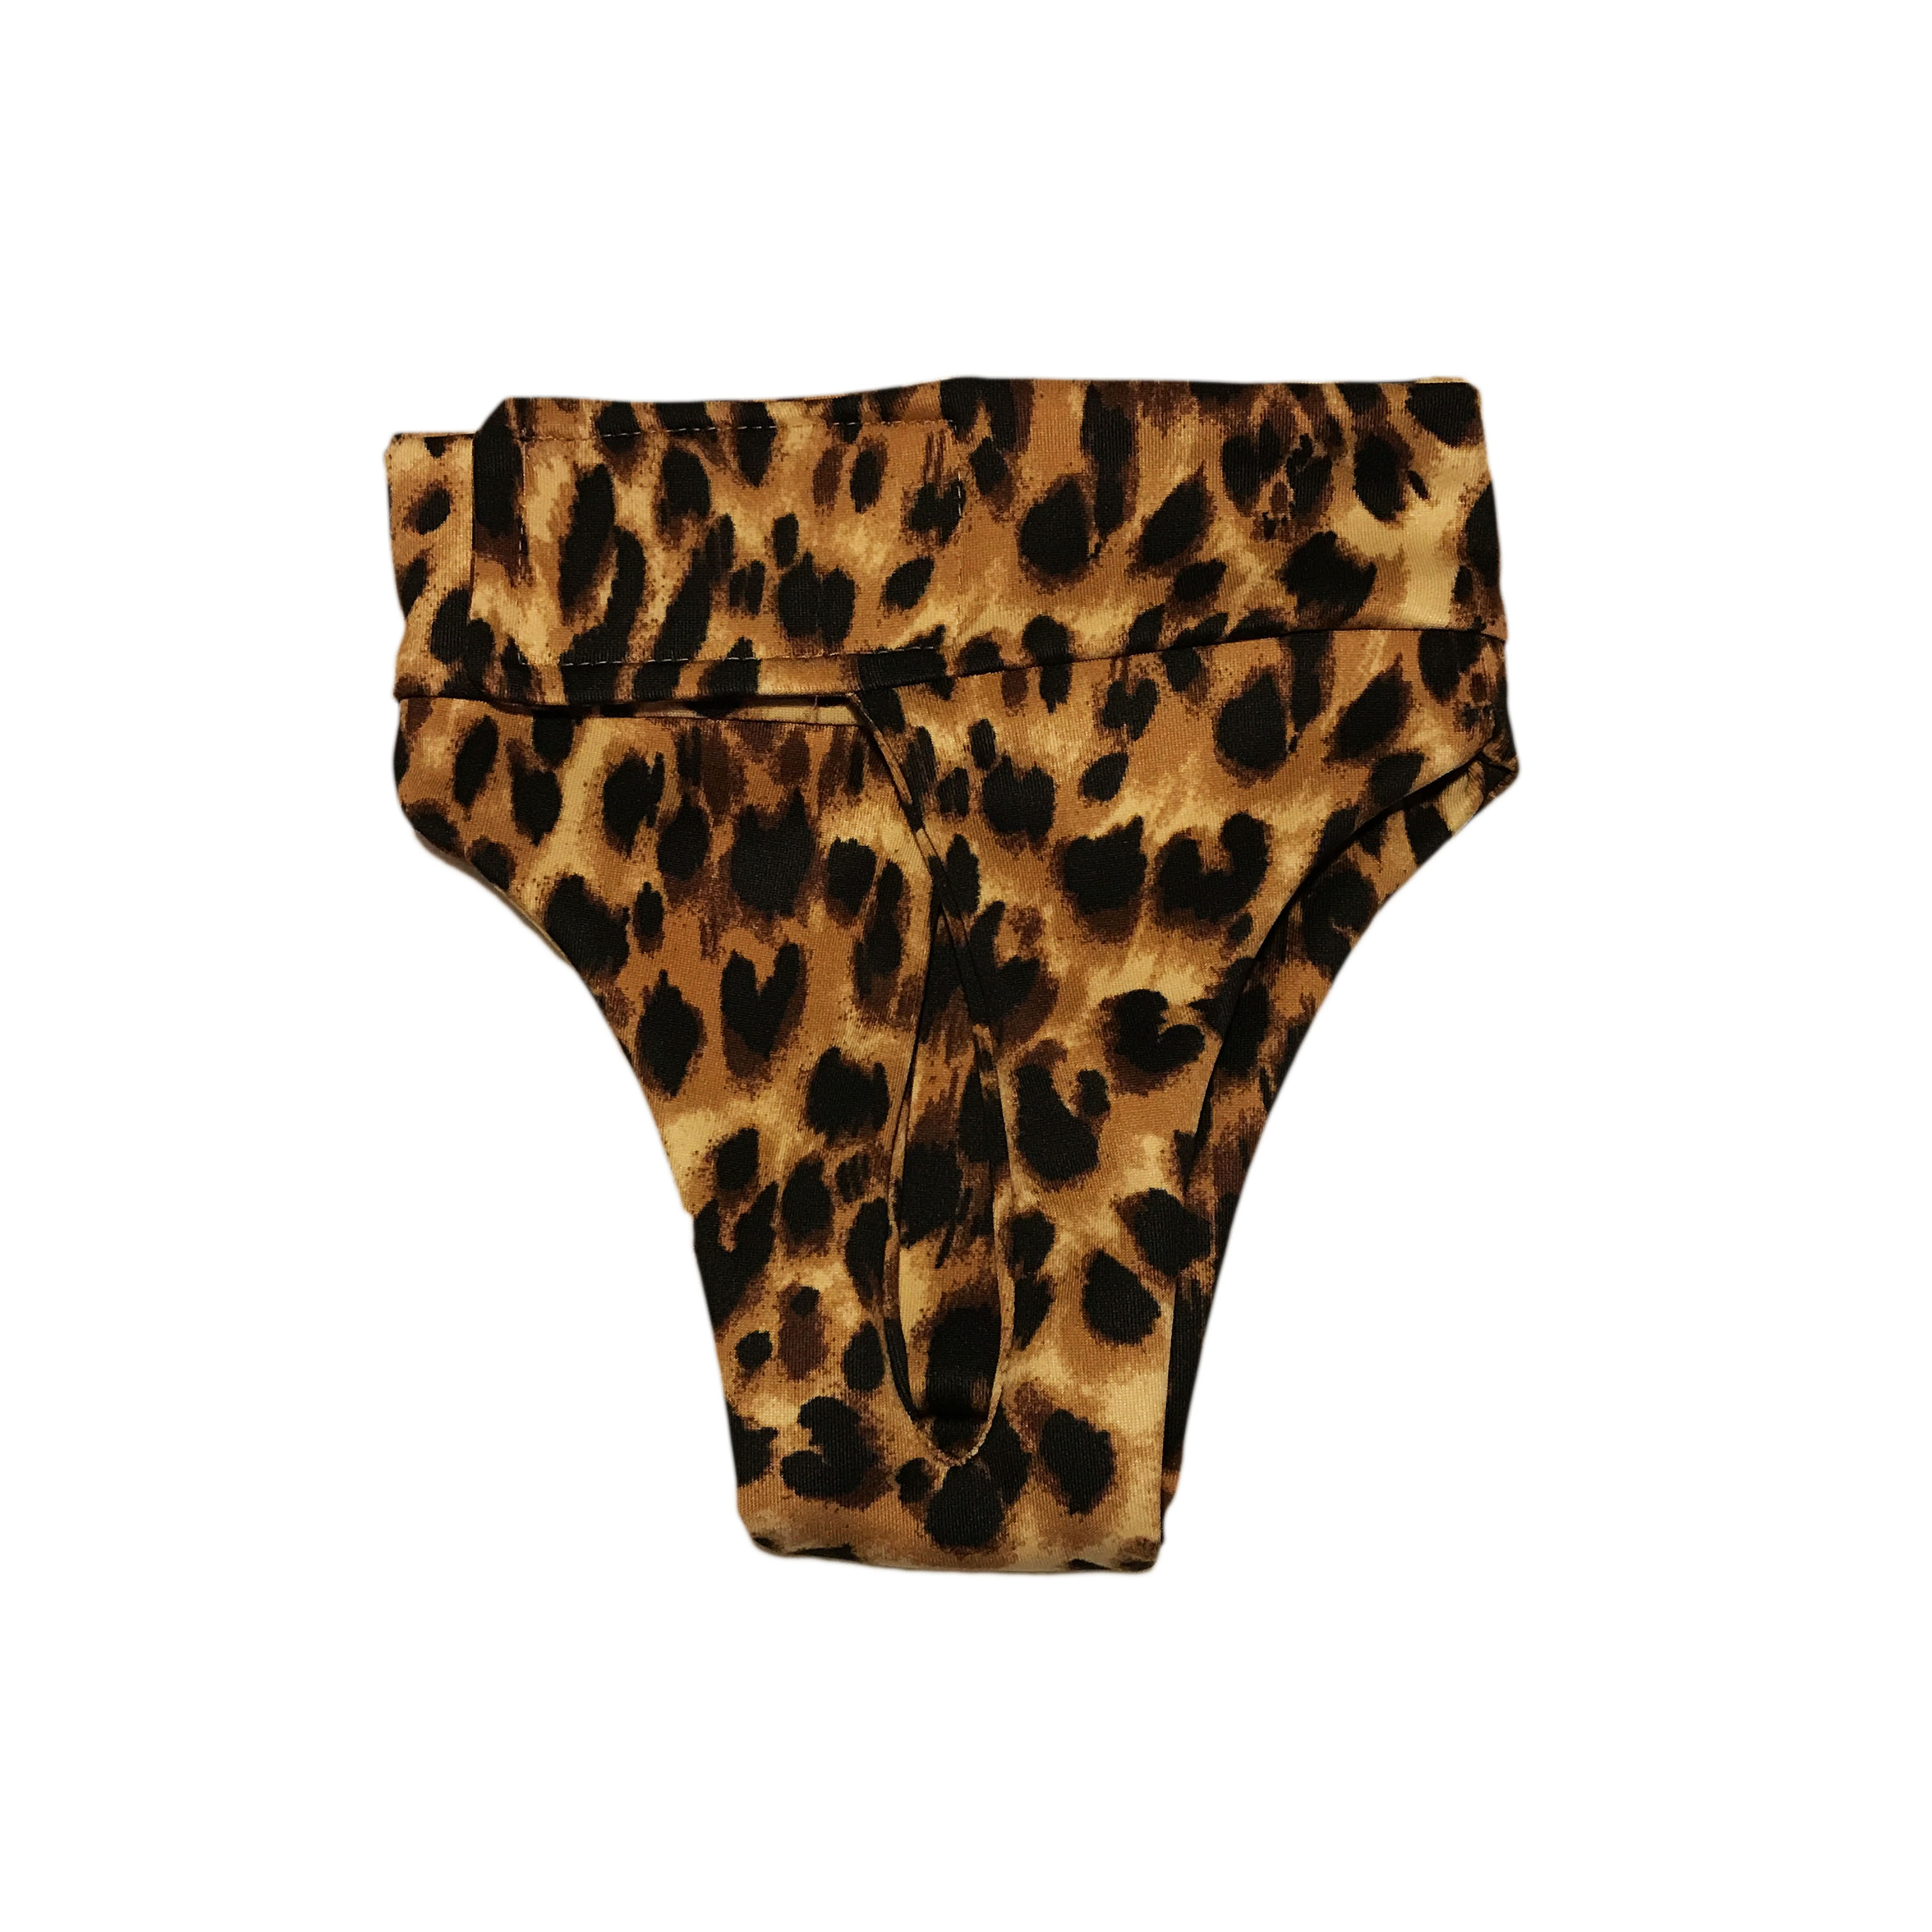 Barkertime Cheetah Washable Dog Diaper Pull-up